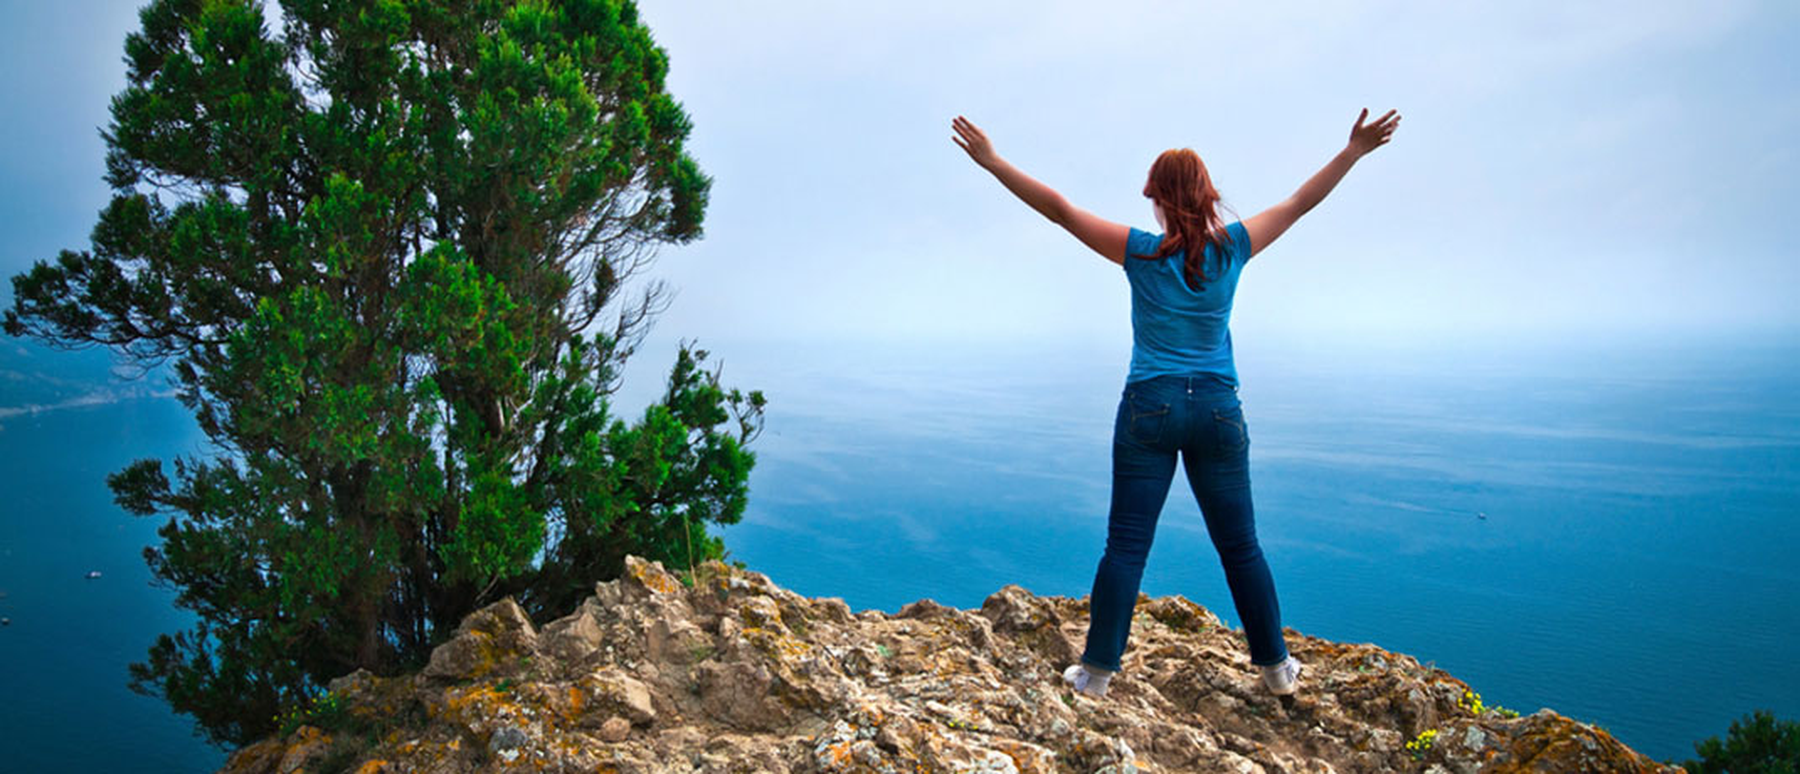 Woman standing on a cliff above the sea with her arms raised